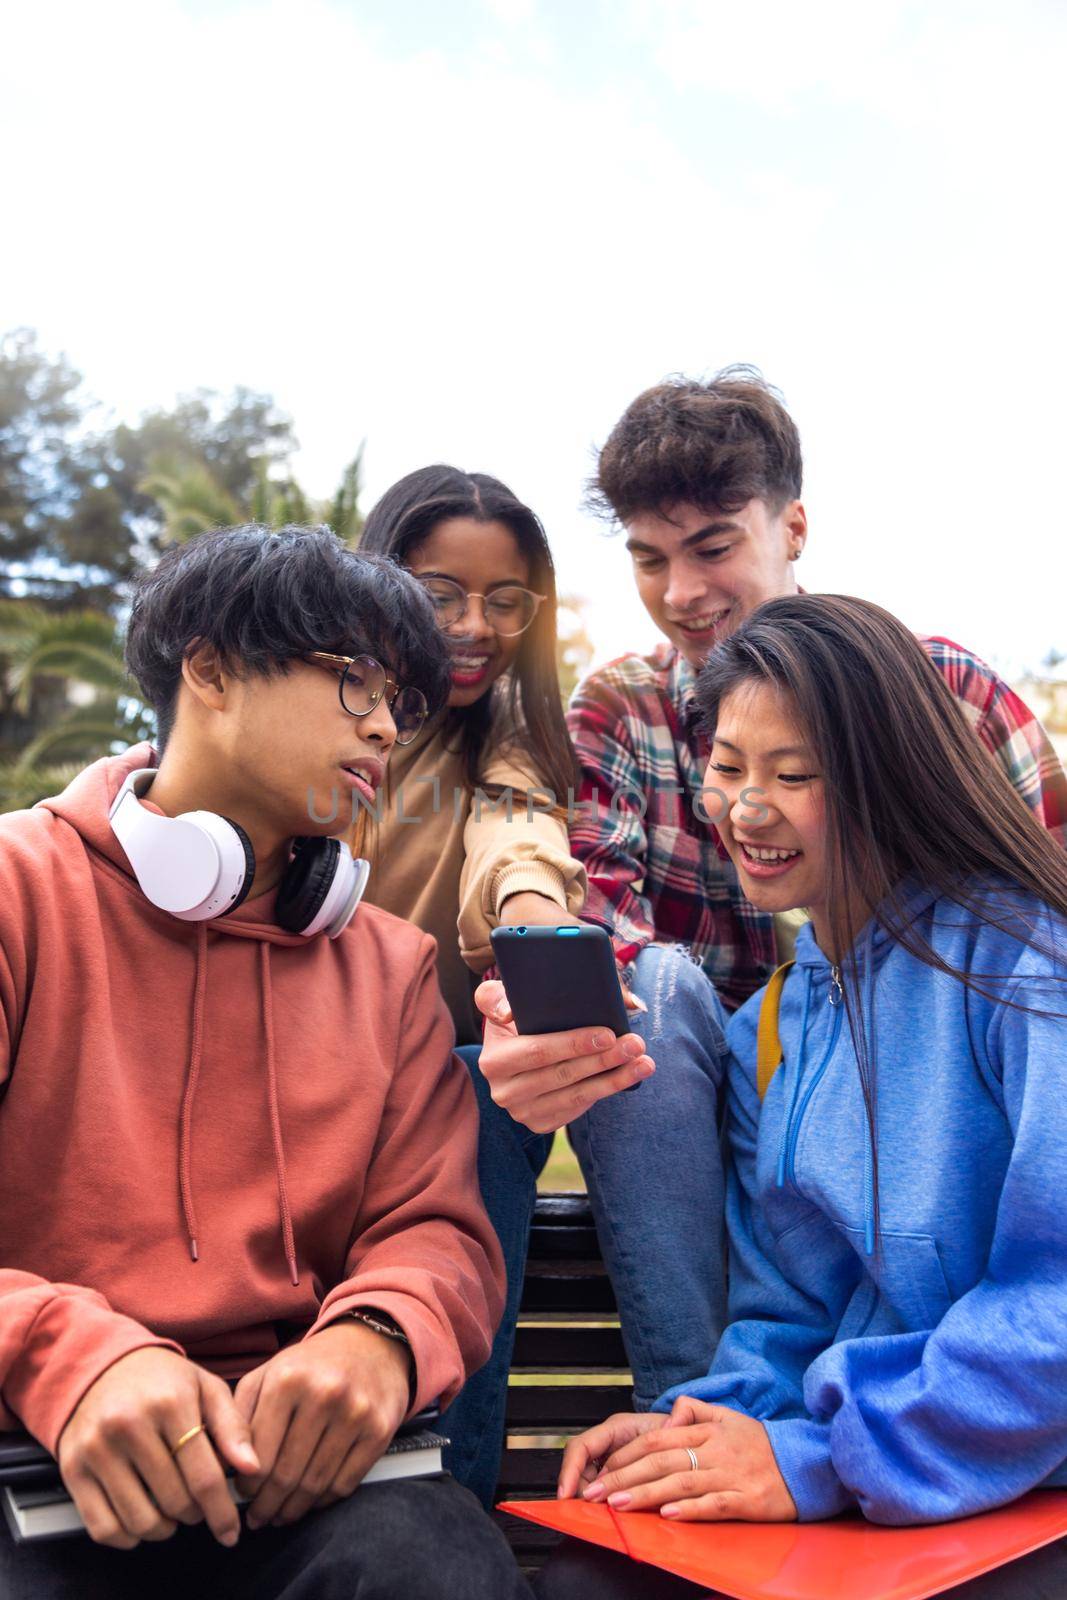 Group of multiracial happy young college student friends look at mobile phone. Teenagers using smartphone together outdoor. Vertical image. Youth lifestyle and social media addiction concept.